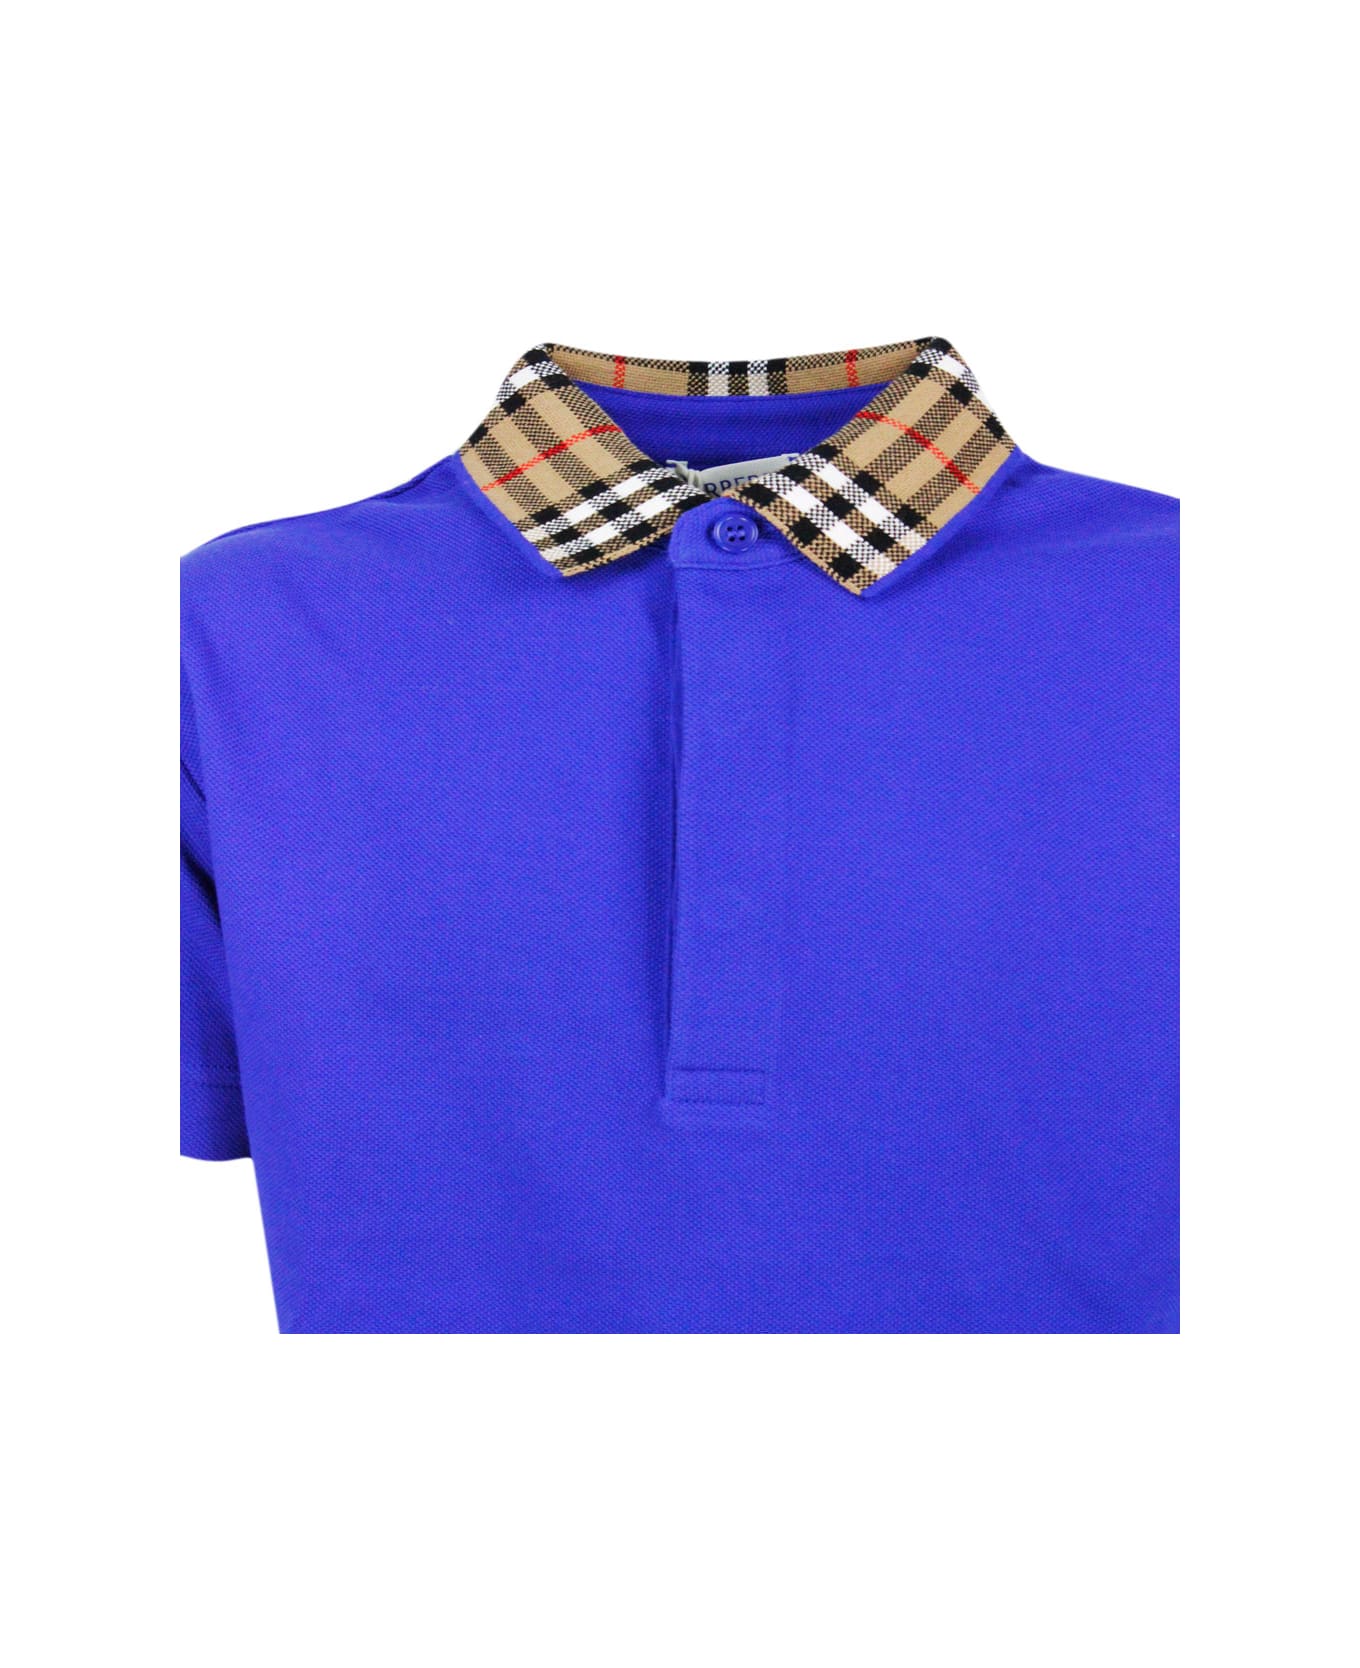 Burberry Piqué Cotton Polo Shirt With Check Collar And Button Closure - Blu royal Tシャツ＆ポロシャツ